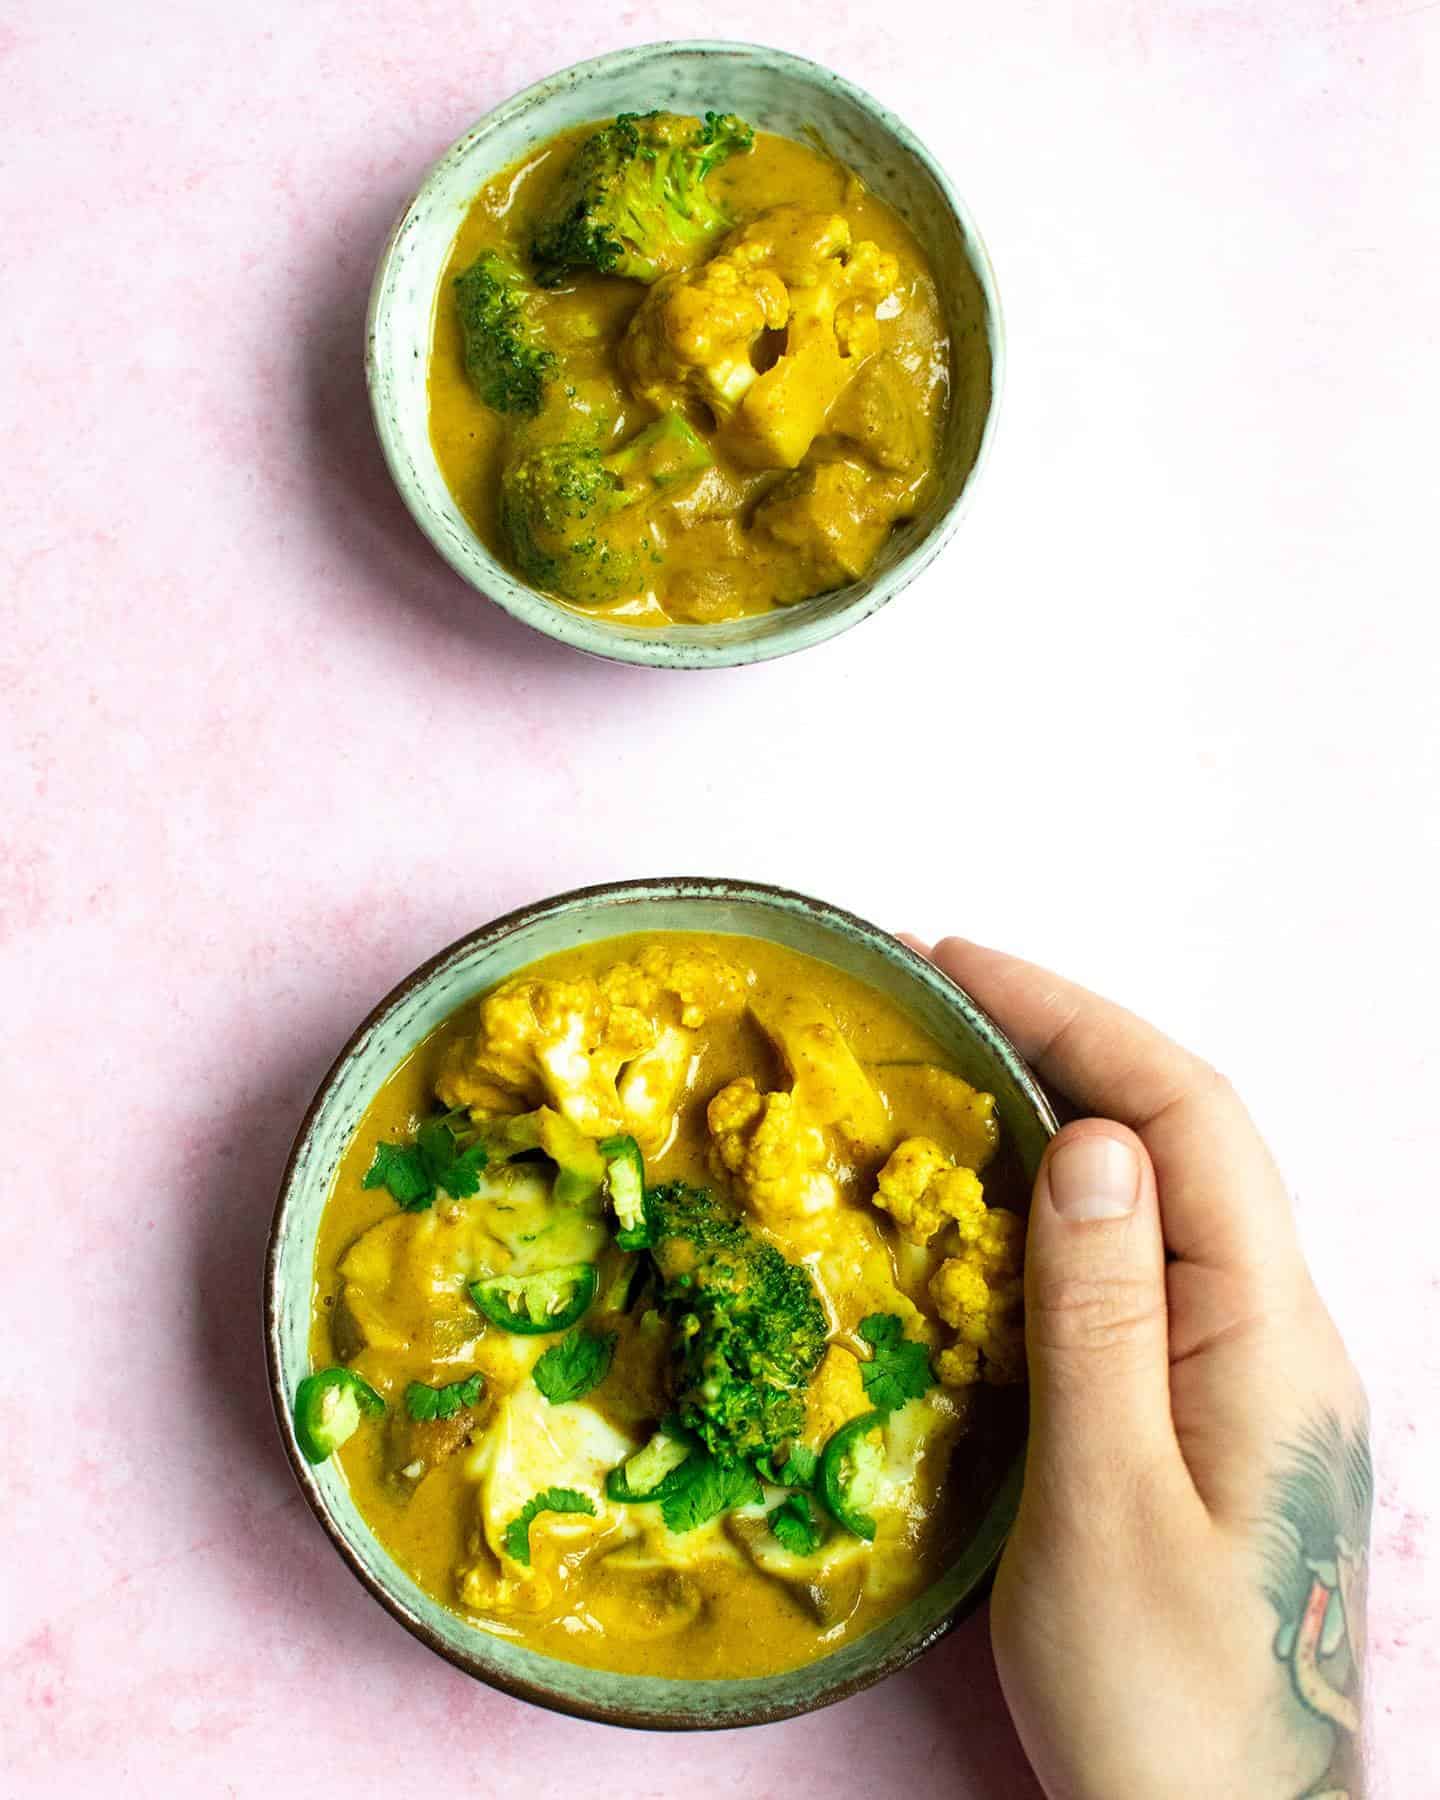 Two bowls of peanut butter curry, one above the other with a man's hand holding one of them